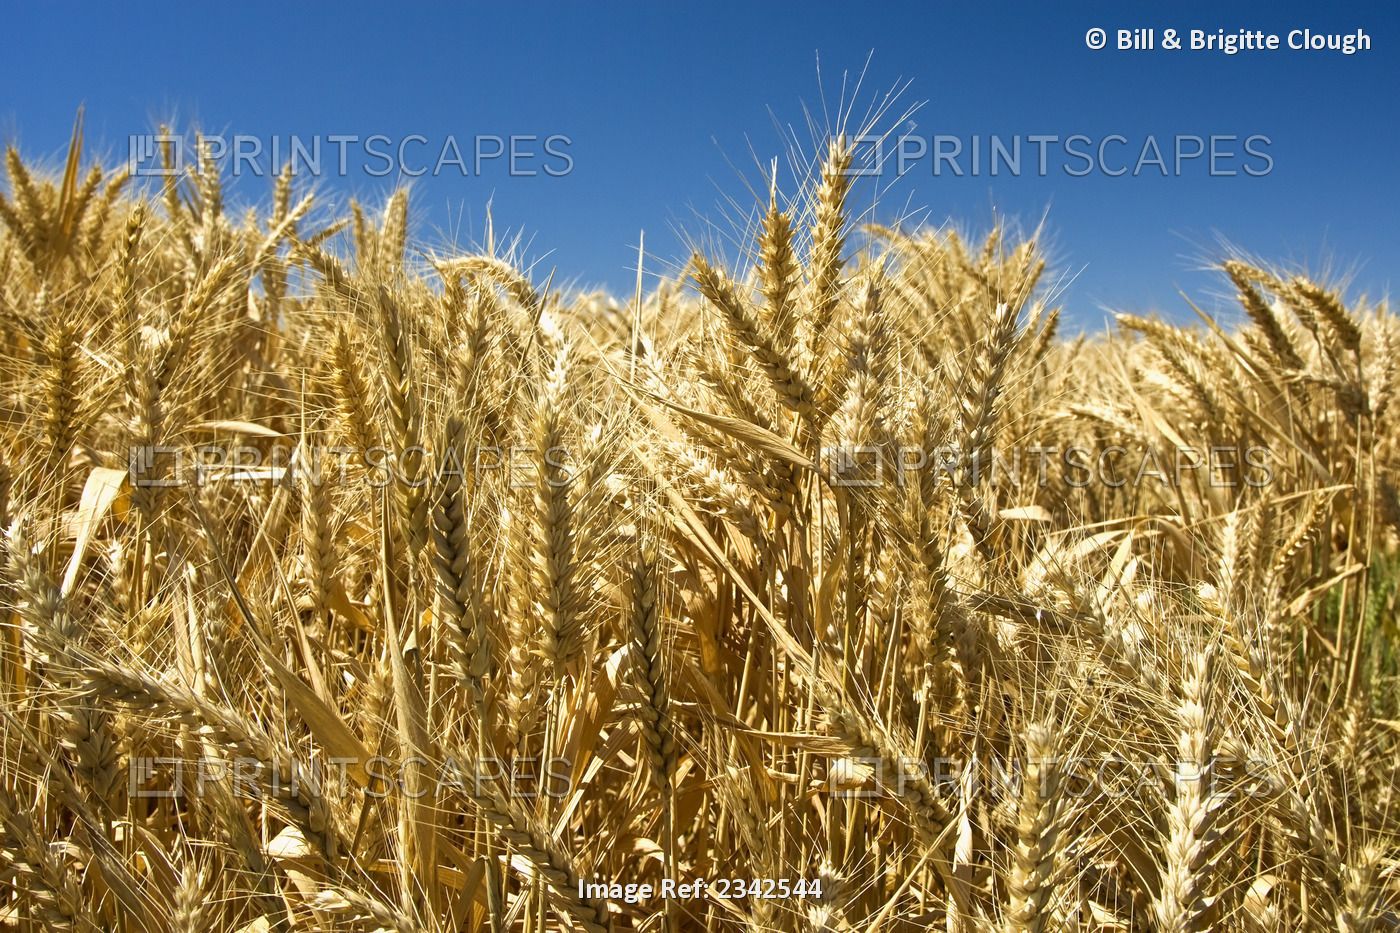 Agriculture - Closeup view of mature heads of bearded (awned) wheat / near ...